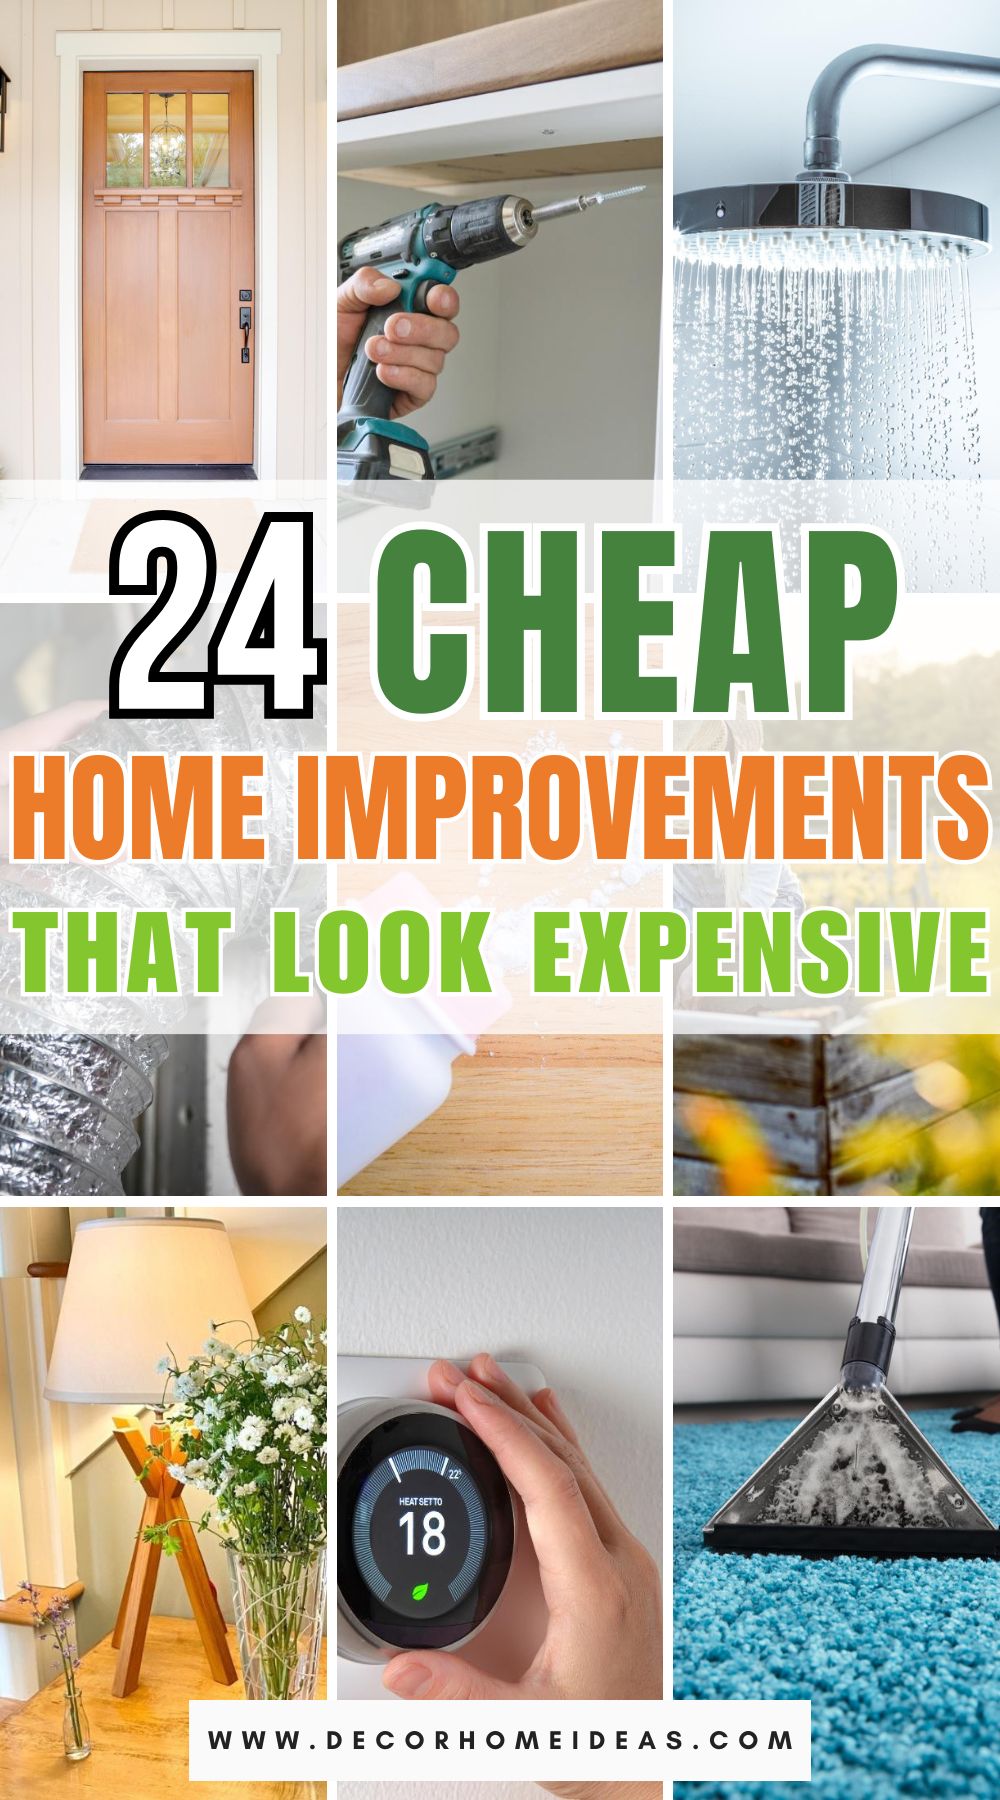 Cheap and easy home improvements